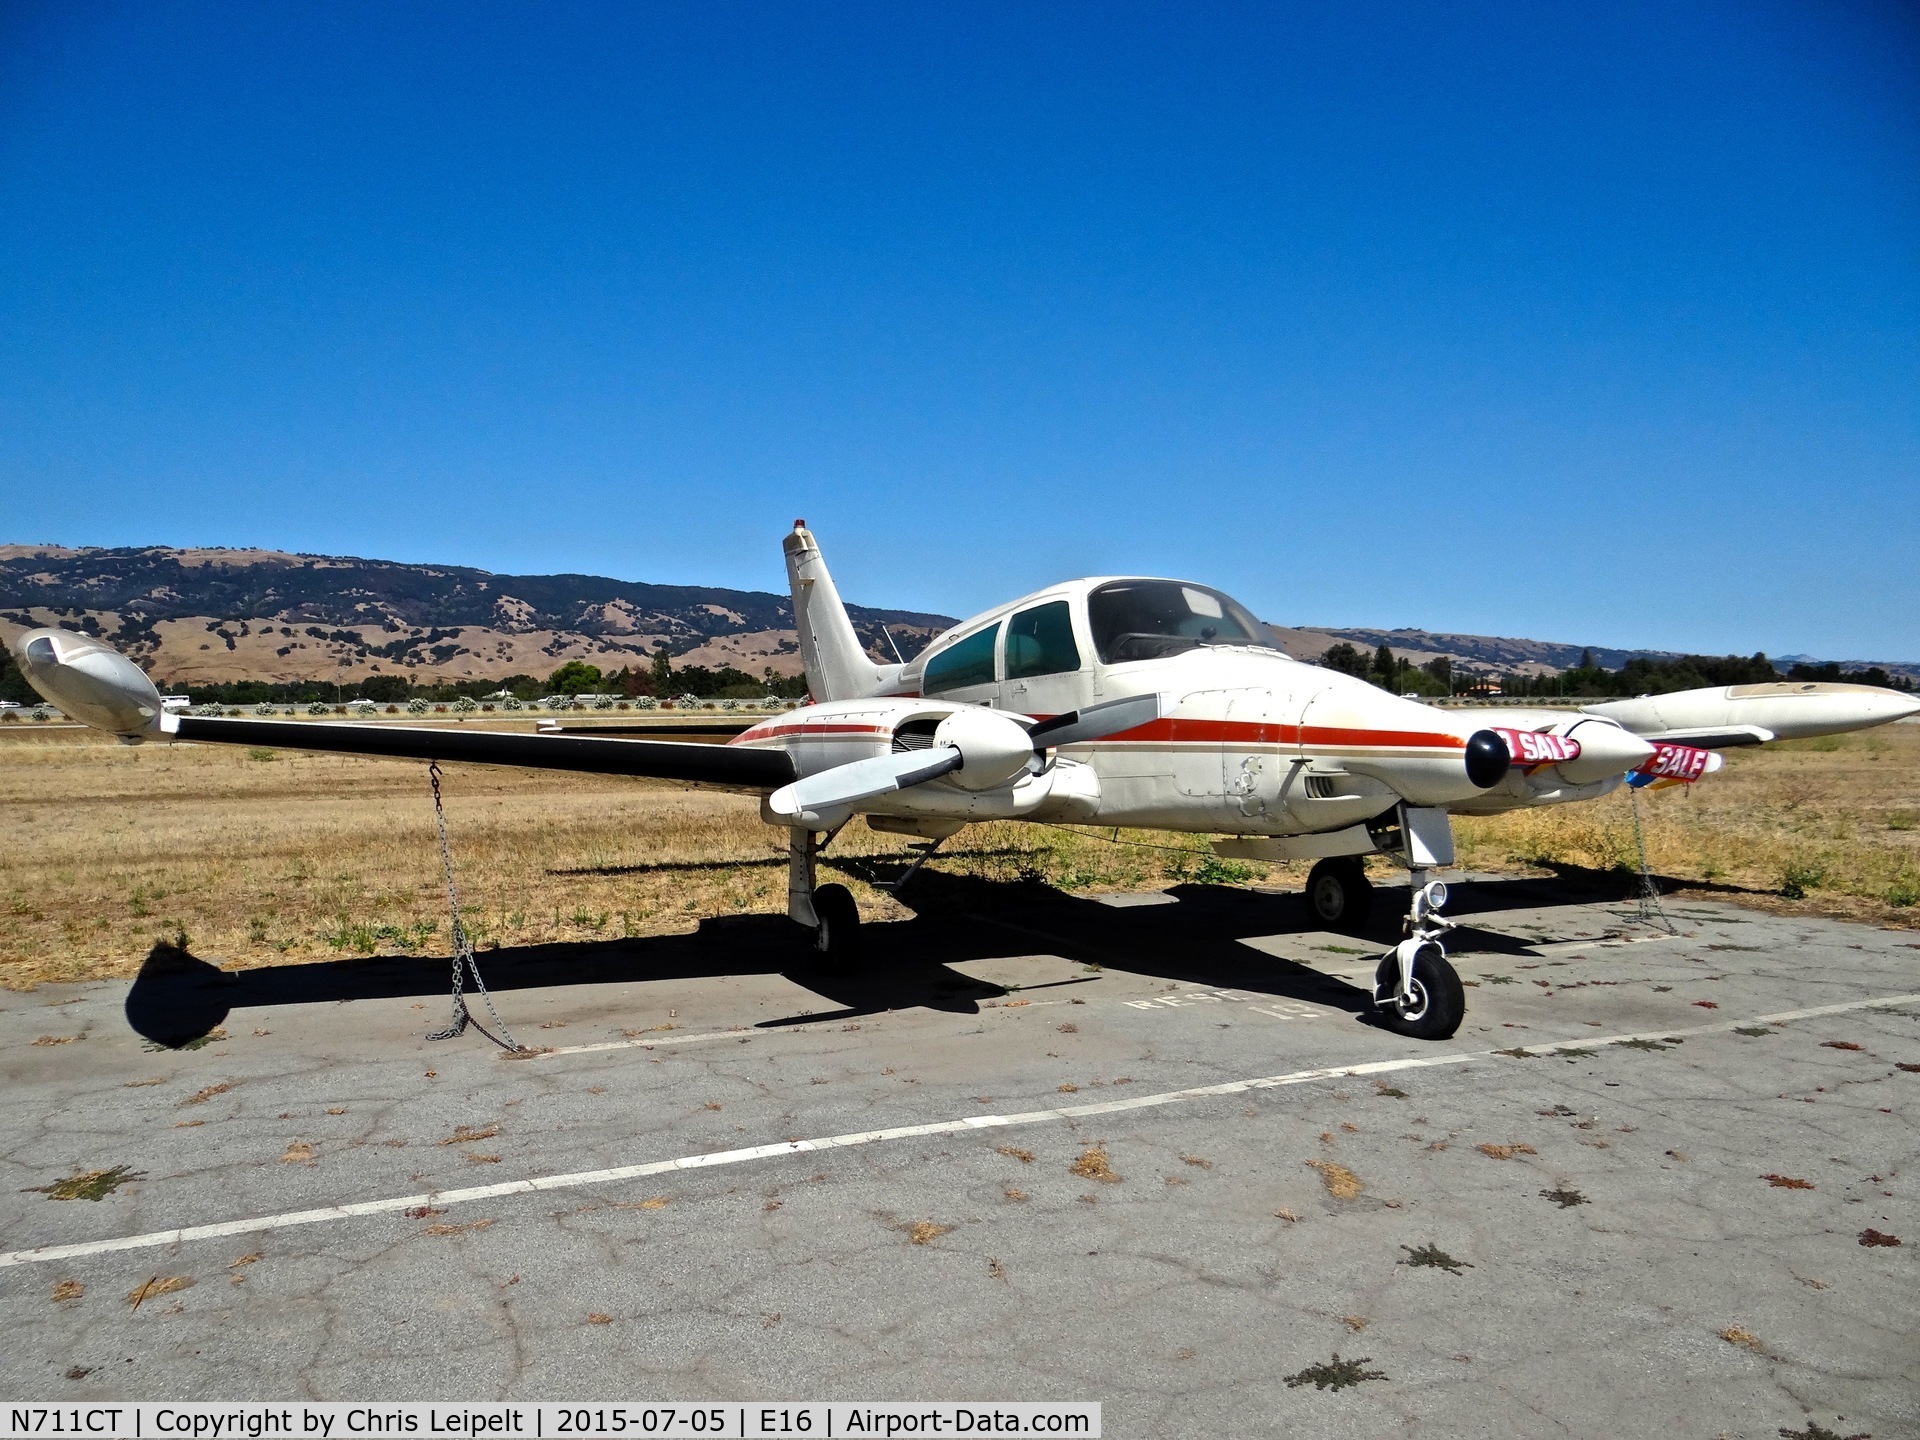 N711CT, 1973 Cessna 310Q C/N 310Q0677, Locally-based 1973 Cessna 310Q sitting at its tie down at South County Airport, San Martin, CA. It has been for sale for quite some time.